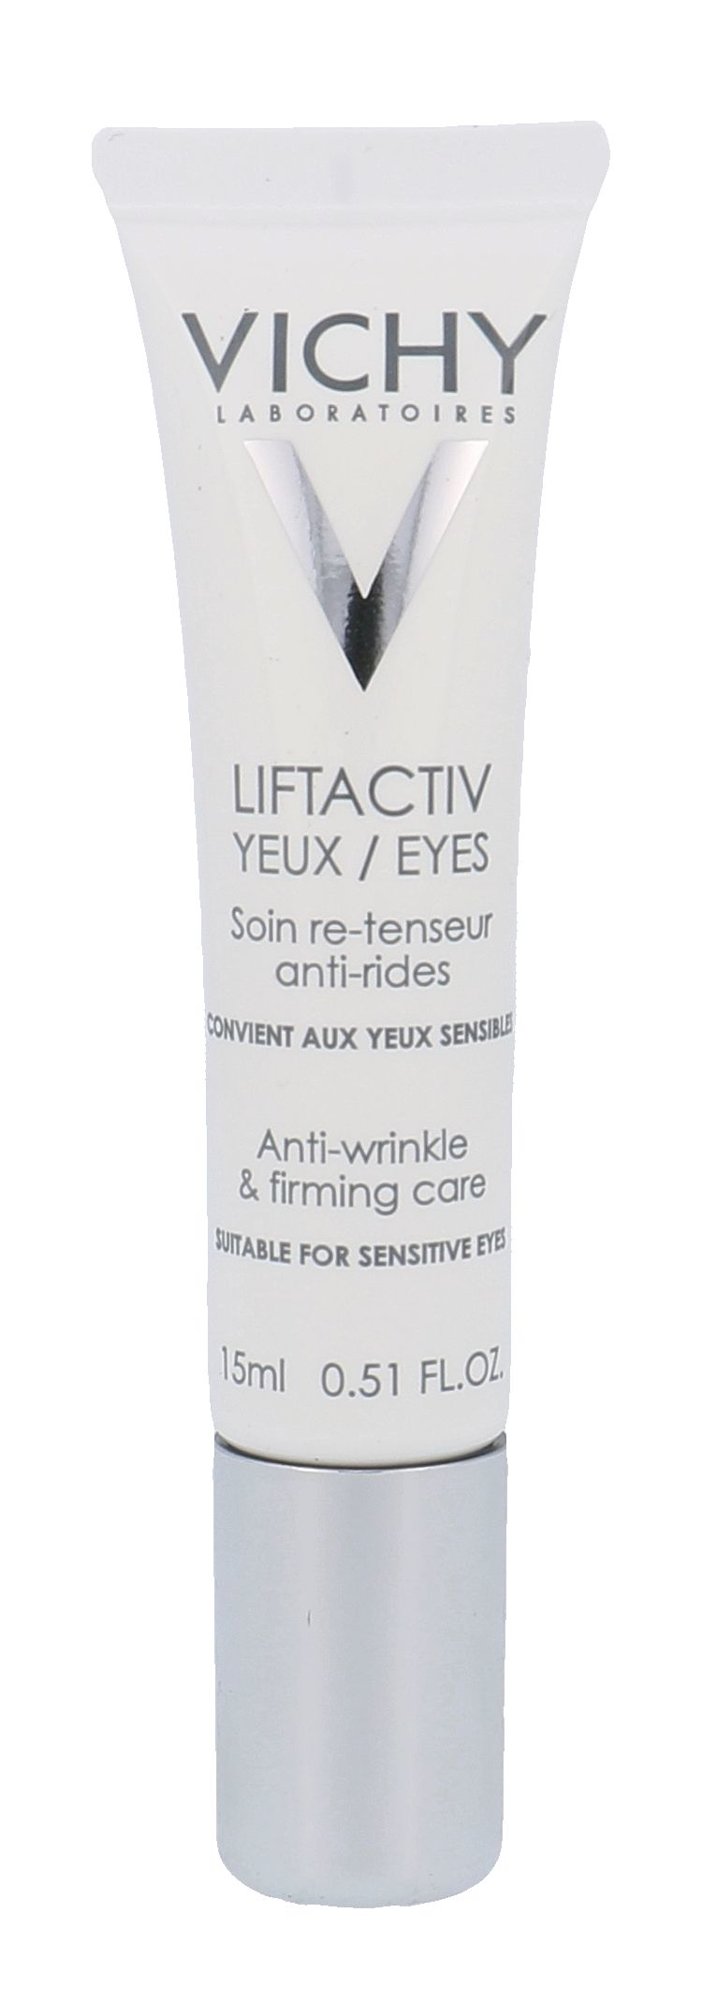 Vichy Liftactiv Eyes Global Anti-Wrinkle & Firming Care